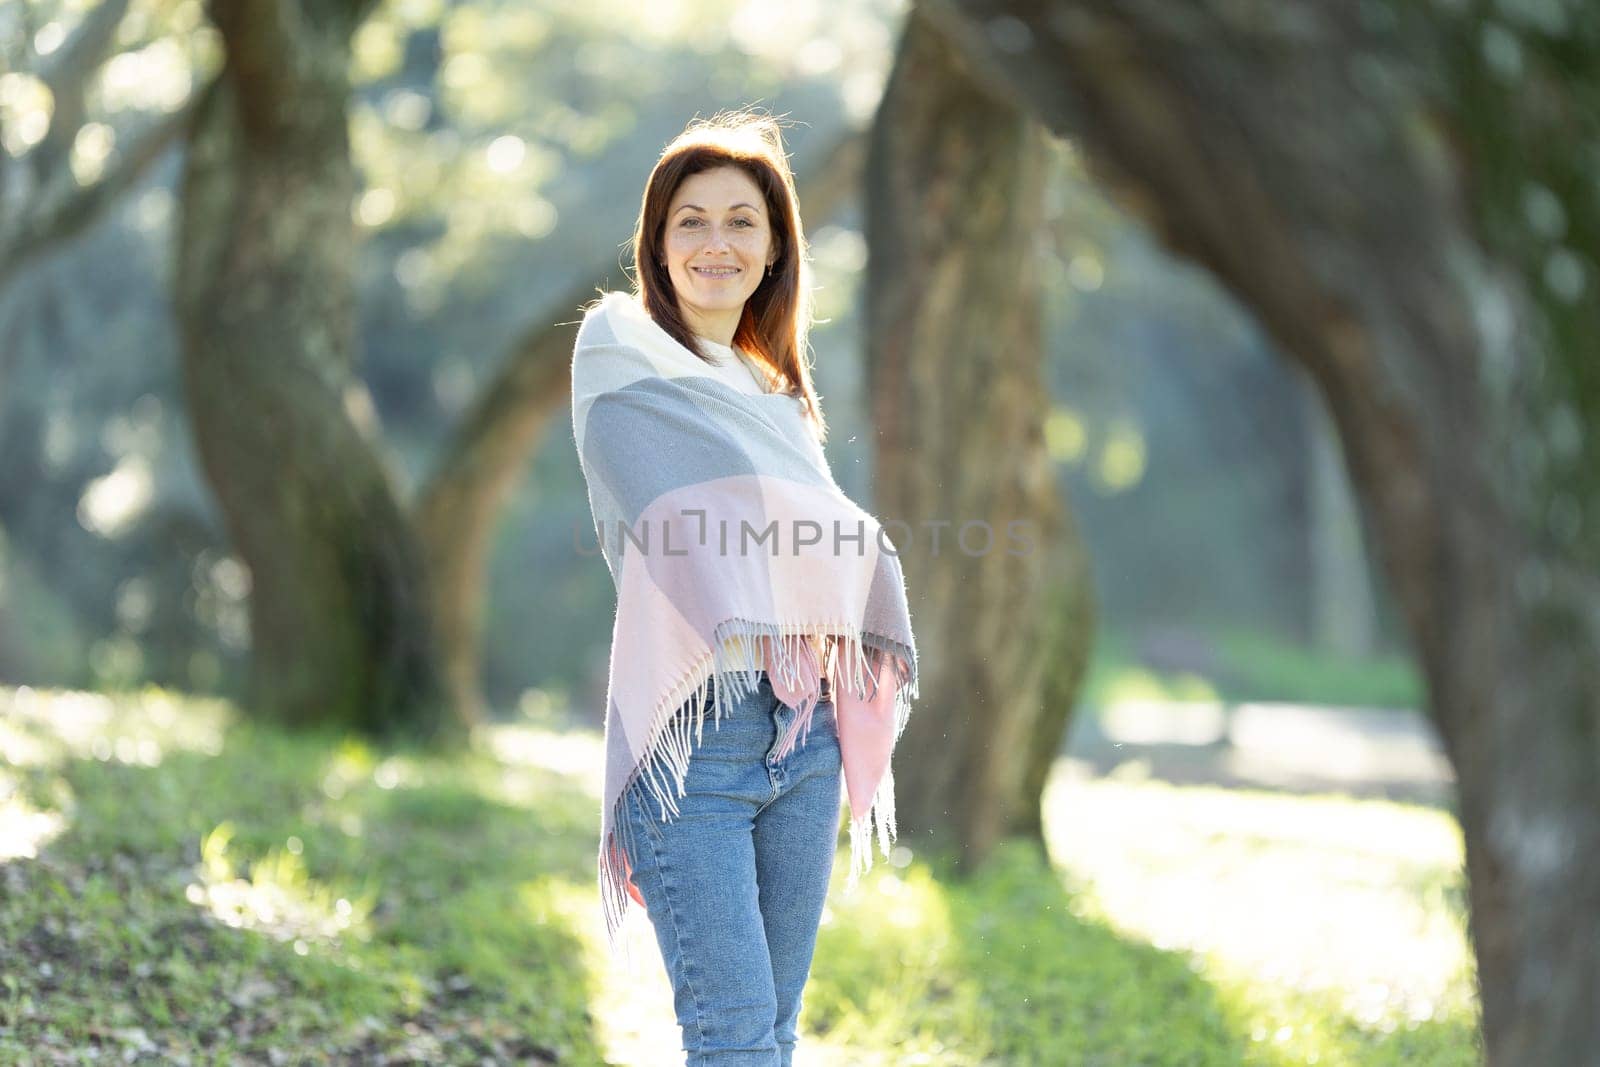 A woman is standing in a park, wearing a colorful scarf and jeans. She is smiling and looking towards the camera